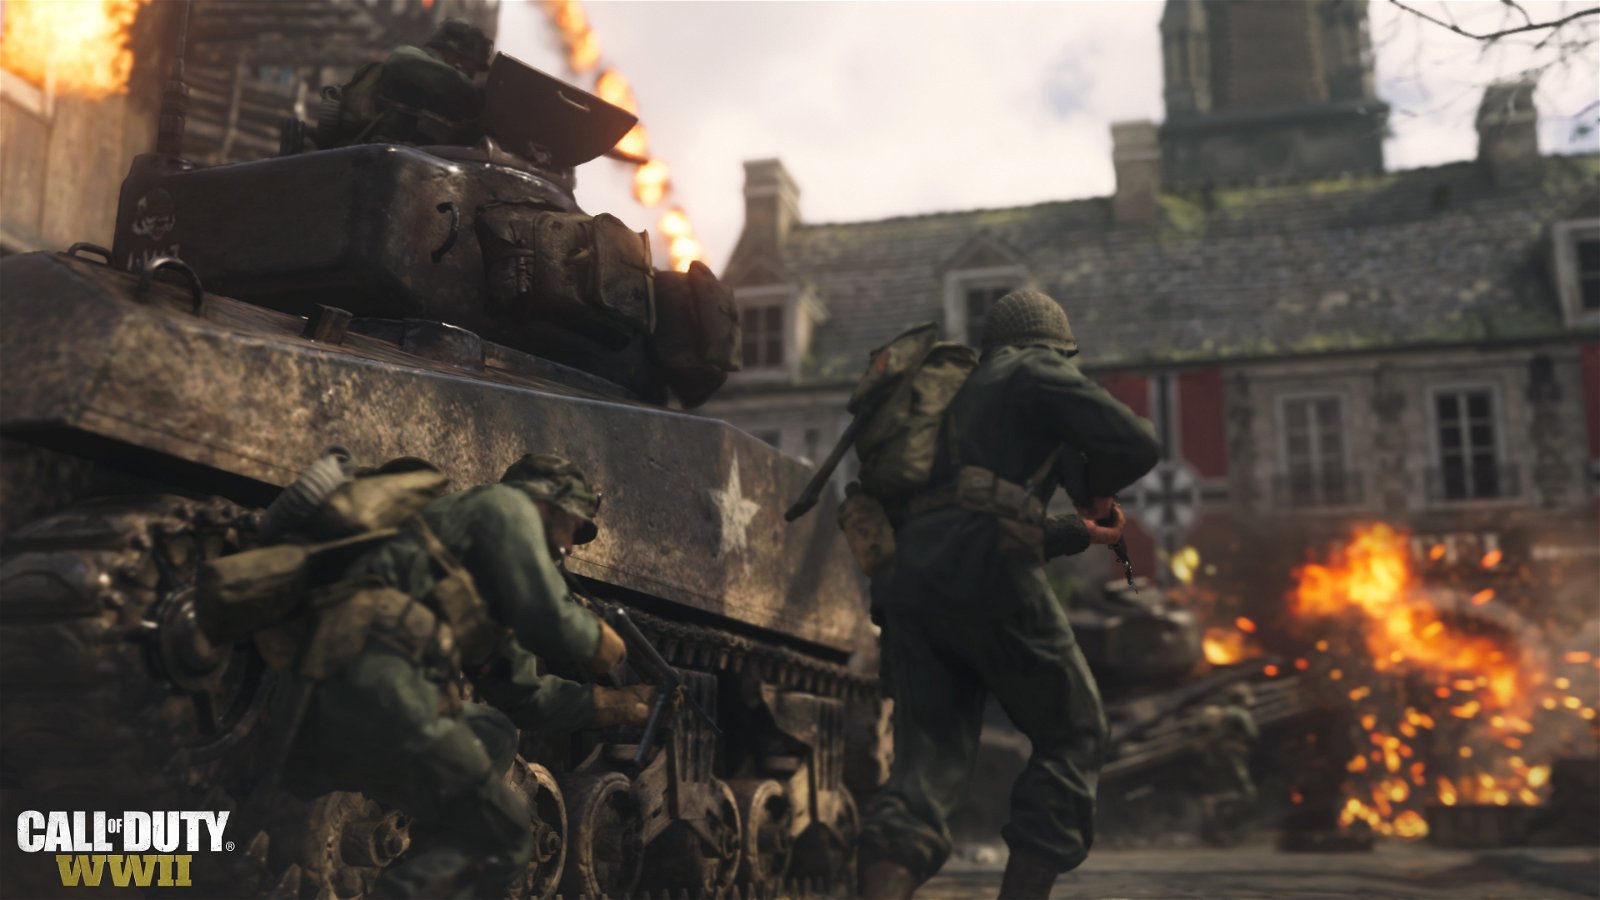 Call Of Duty: Ww2 E3 Preview - Back To It’s Roots And A Step Forward 2